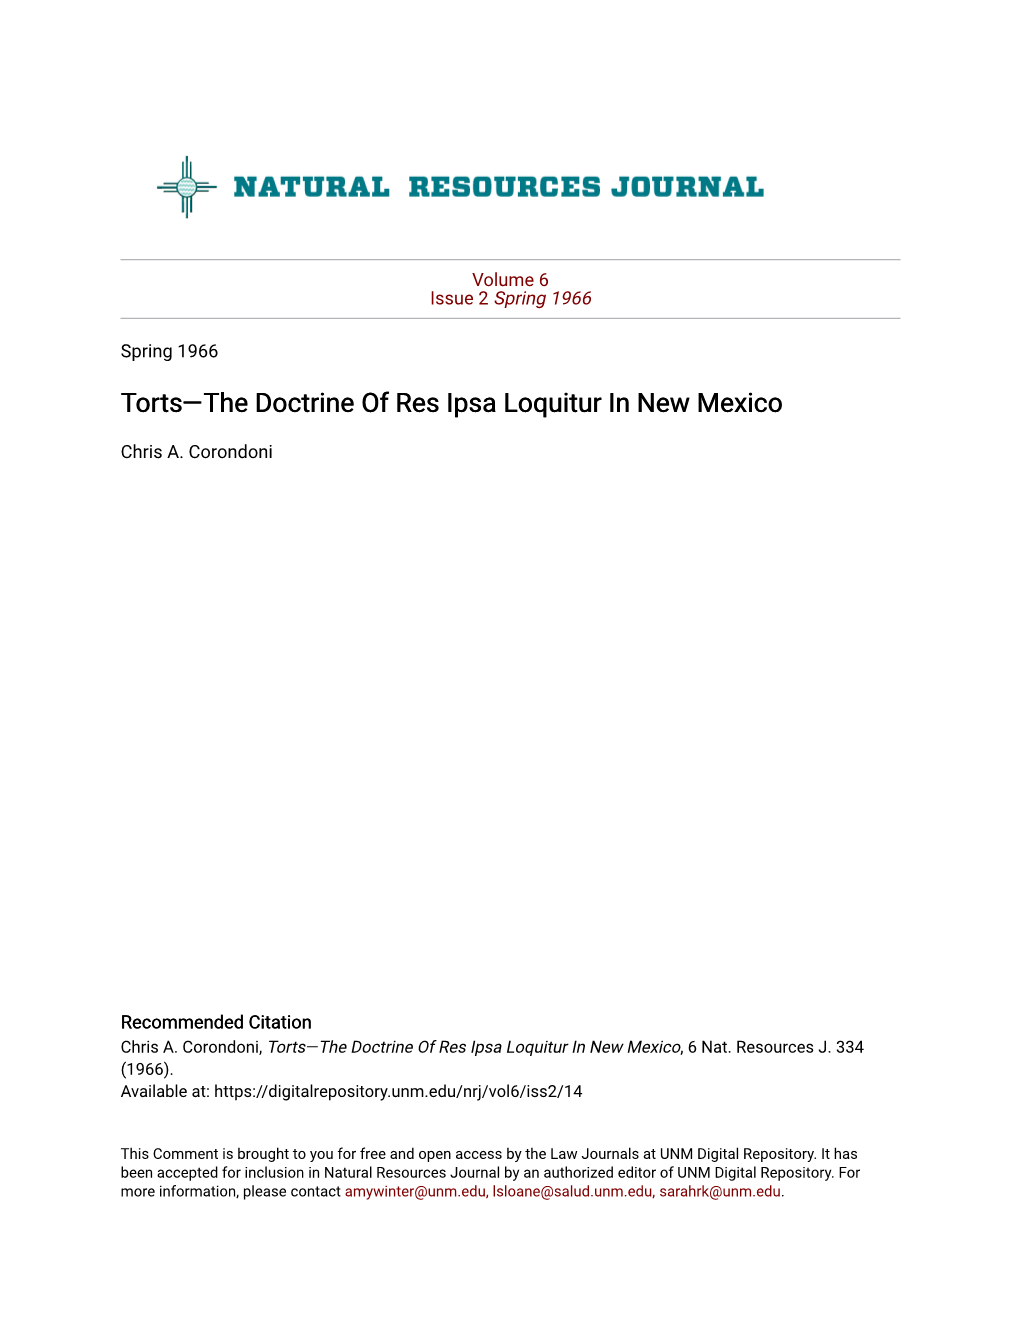 Tortsâ•Flthe Doctrine of Res Ipsa Loquitur in New Mexico